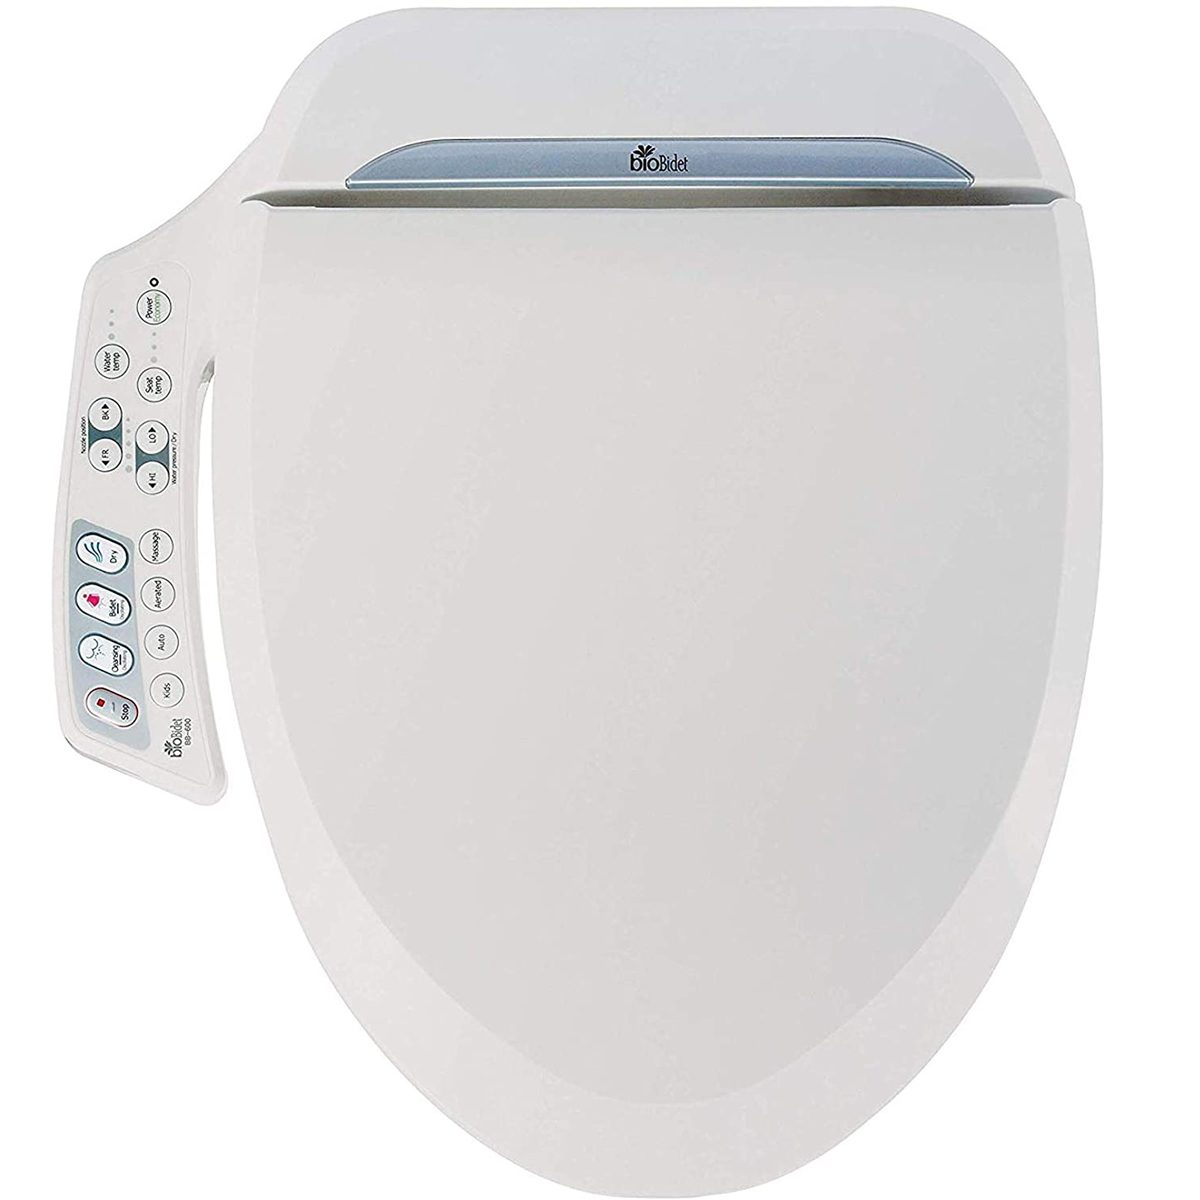 <p class="a-spacing-base">Engineered for luxury, <a href="https://www.amazon.com/dp/B007HIKQCK/?tag=fhm_msn-20" rel="noopener noreferrer">BioBidet BB-600</a> is full-featured. With front and rear warm water cleansing, <a href="https://www.familyhandyman.com/article/how-long-will-germs-last/">anti-bacterial material</a> and a massage feature with a wide clean function, it cycles front and rear streams for unparalleled cleaning. This bidet allows you to adjust the water temperature, water pressure and the position of the gentle aerated stream. Its heated soft closing seat provides comfort and relaxation at a temperature you control</p> <p class="listicle-page__cta-button-shop"><a class="shop-btn" href="https://www.amazon.com/dp/B007HIKQCK/?tag=fhm_msn-20">Shop Now</a></p>